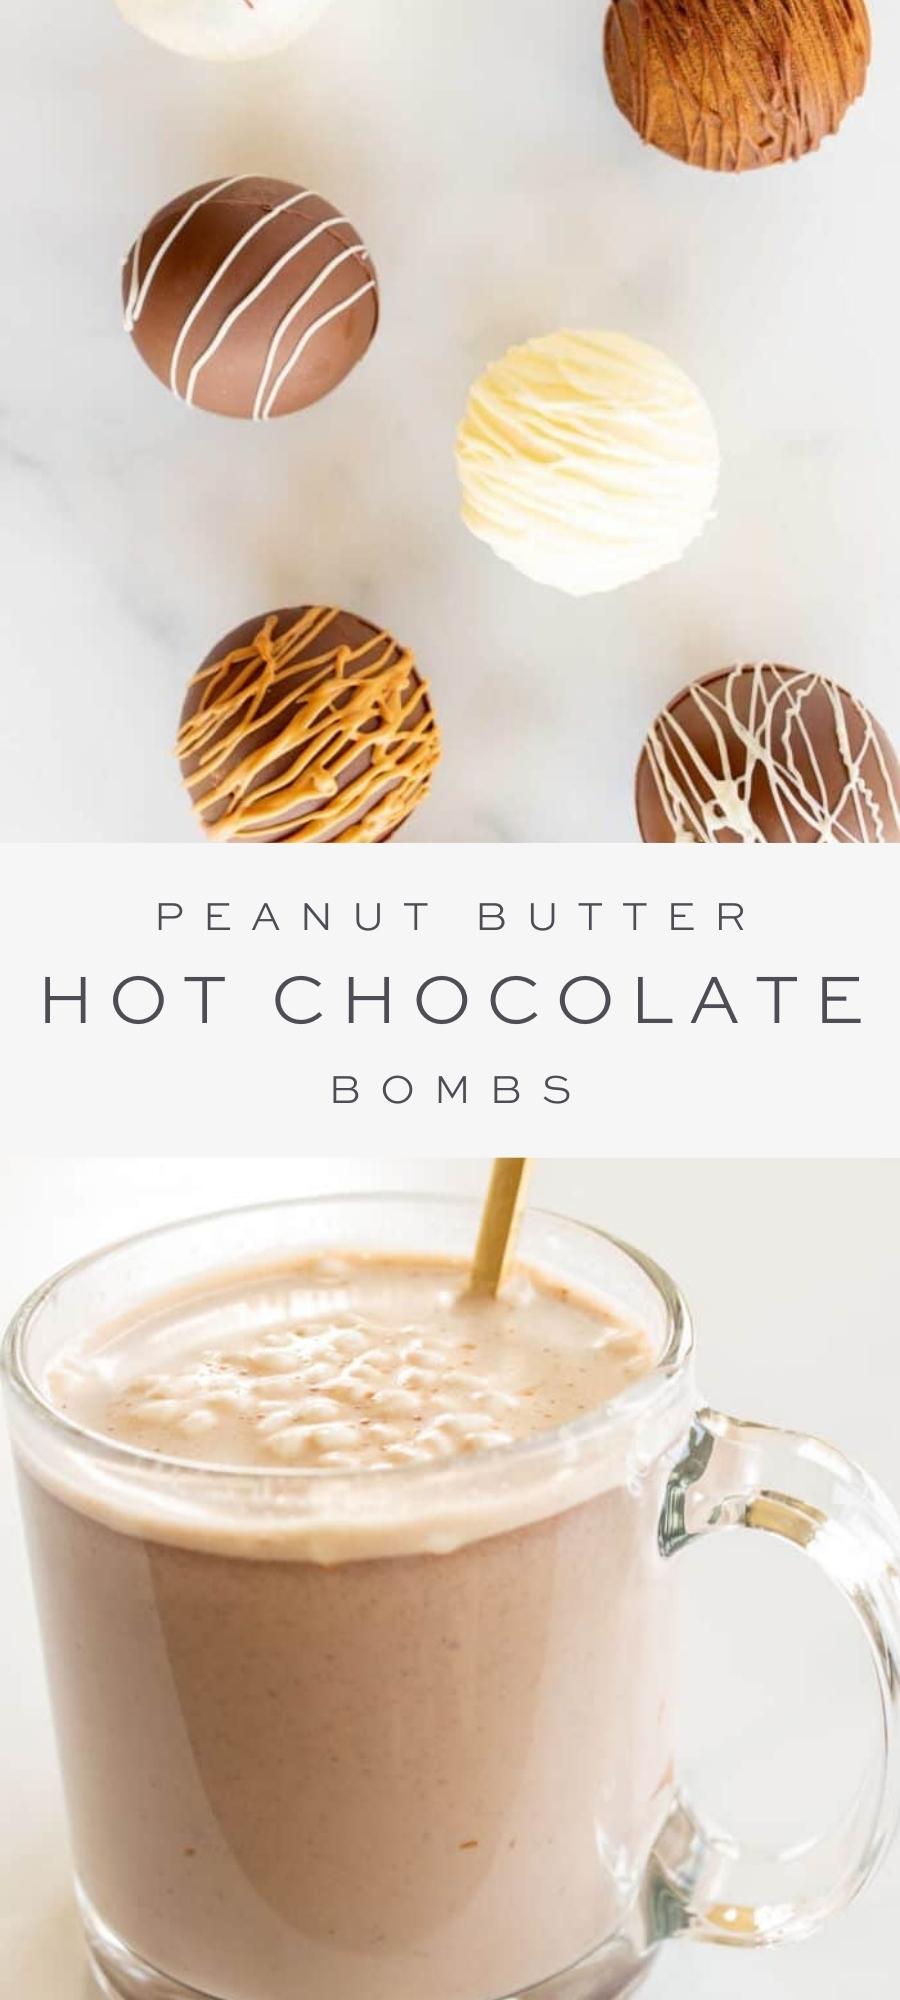 Peanut Butter Hot Chocolate Bombs and hot chocolate in clear mug